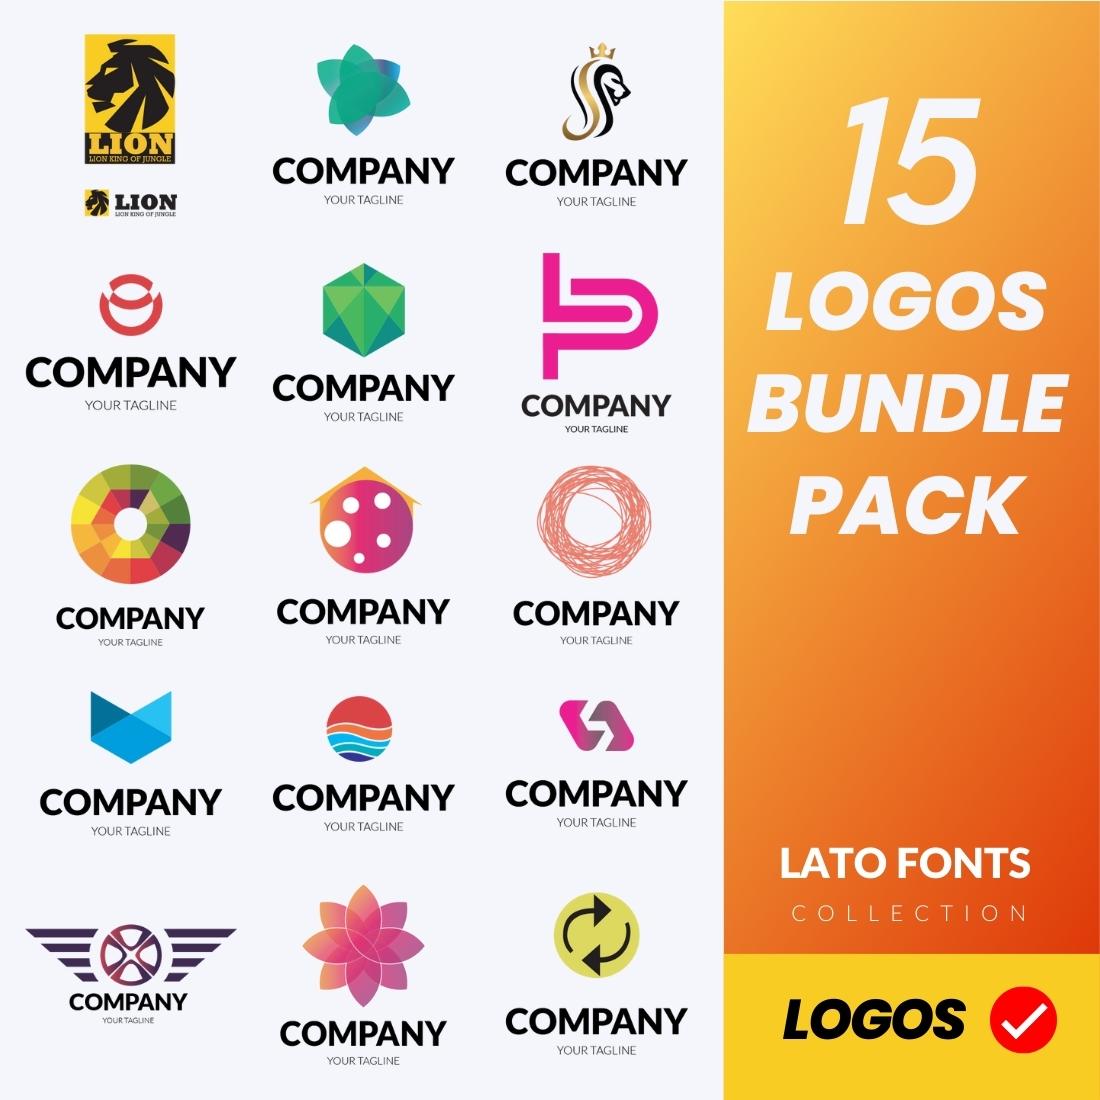 Business Logo Collection-(15-Logos bundle pack) Only-$16 cover image.